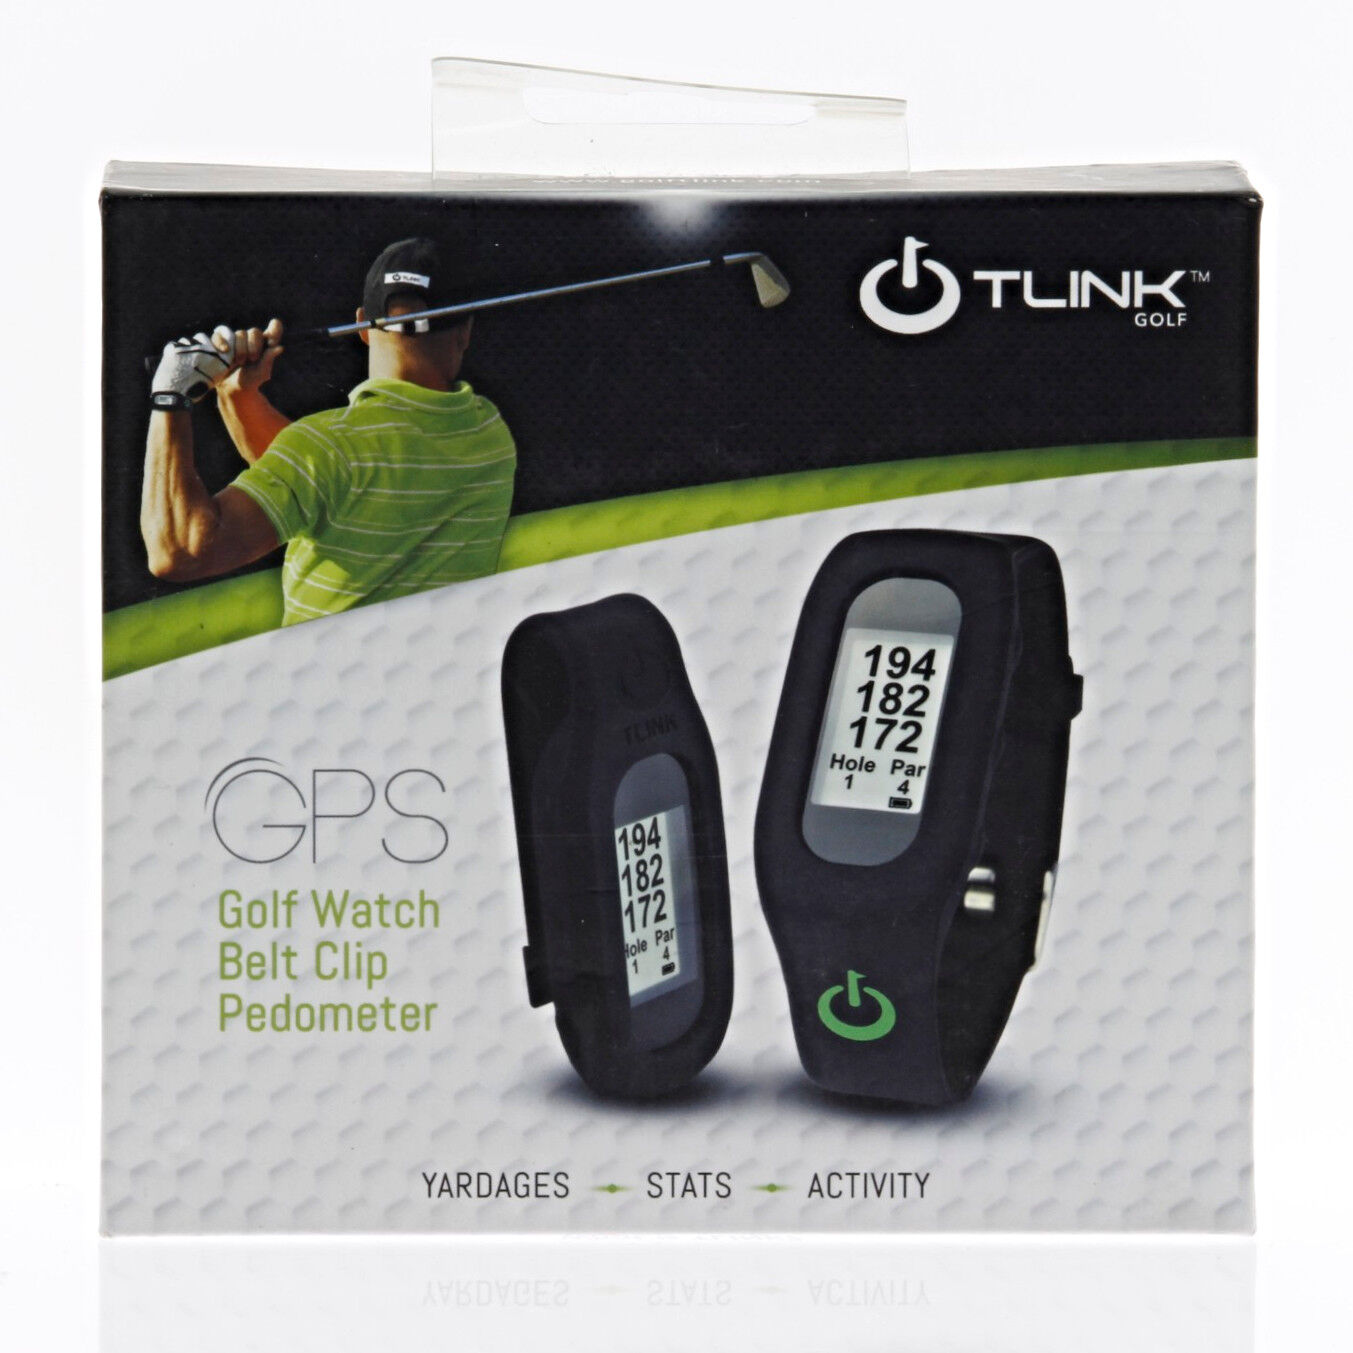 Tlink Golf Gps Watch & Activity Tracker‑App For Ios & Android - Black